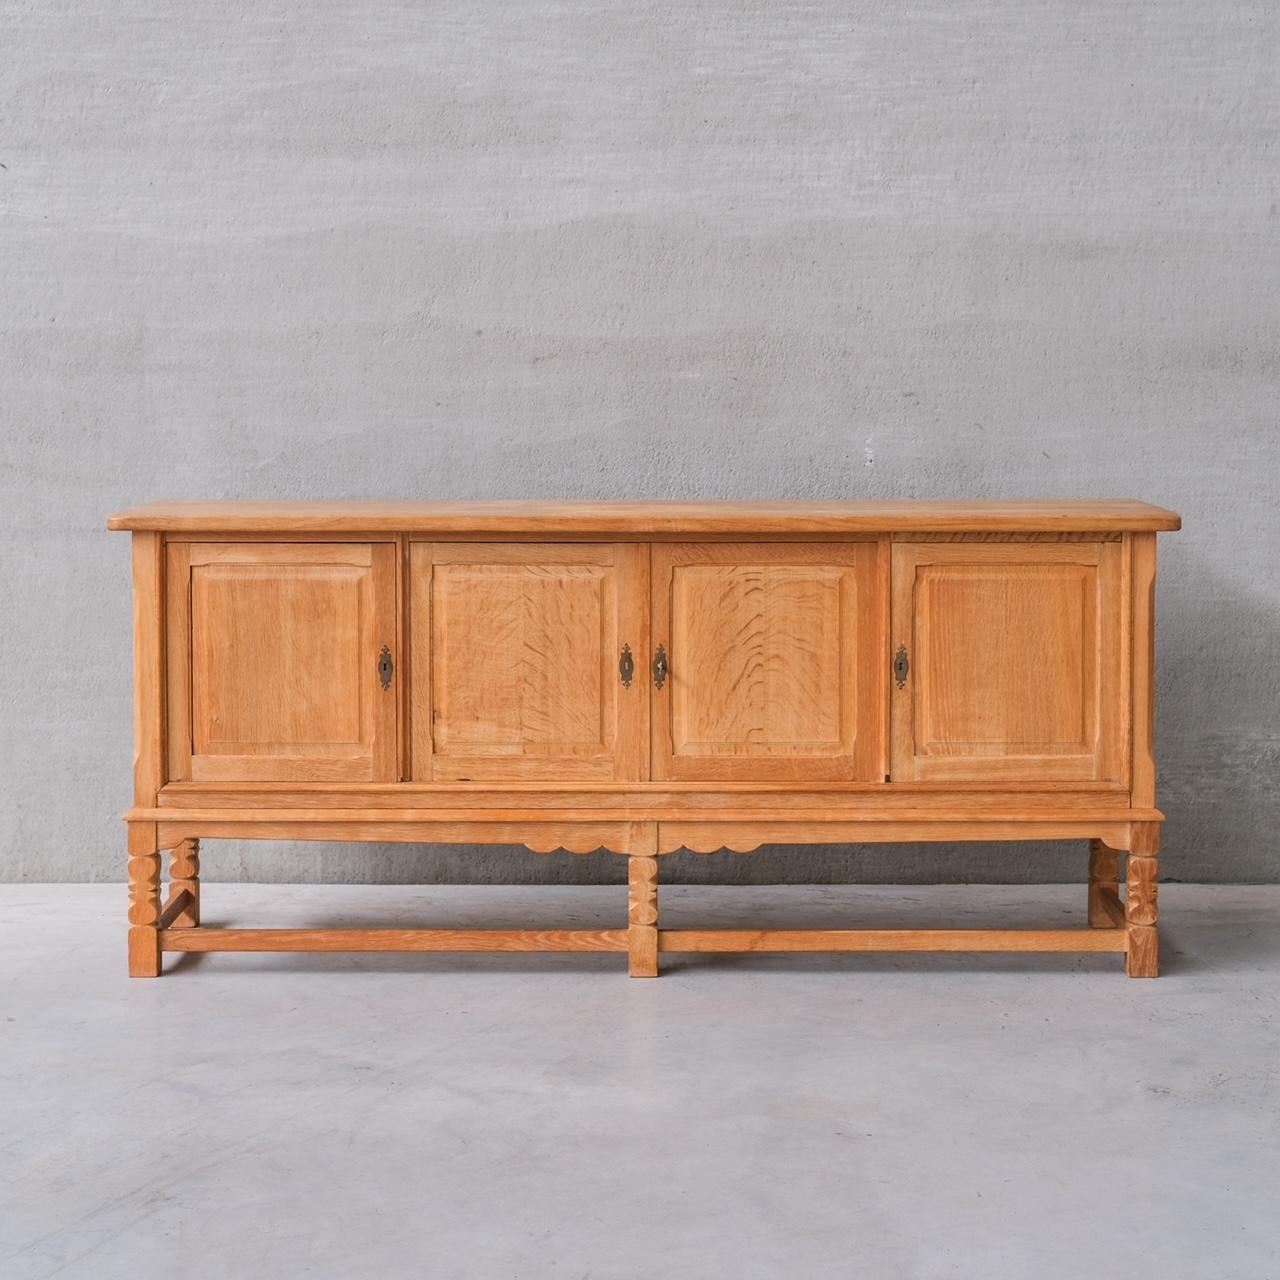 An oak sideboard by Henning (Henry) Kjaernulf.

Denmark, c1960s.

Four door cabinets.

The base separates from the top for transport.

Good vintage condition, some scuffs and wear commensurate with age.

Internal Ref: 18/10/23/044.

Location: London